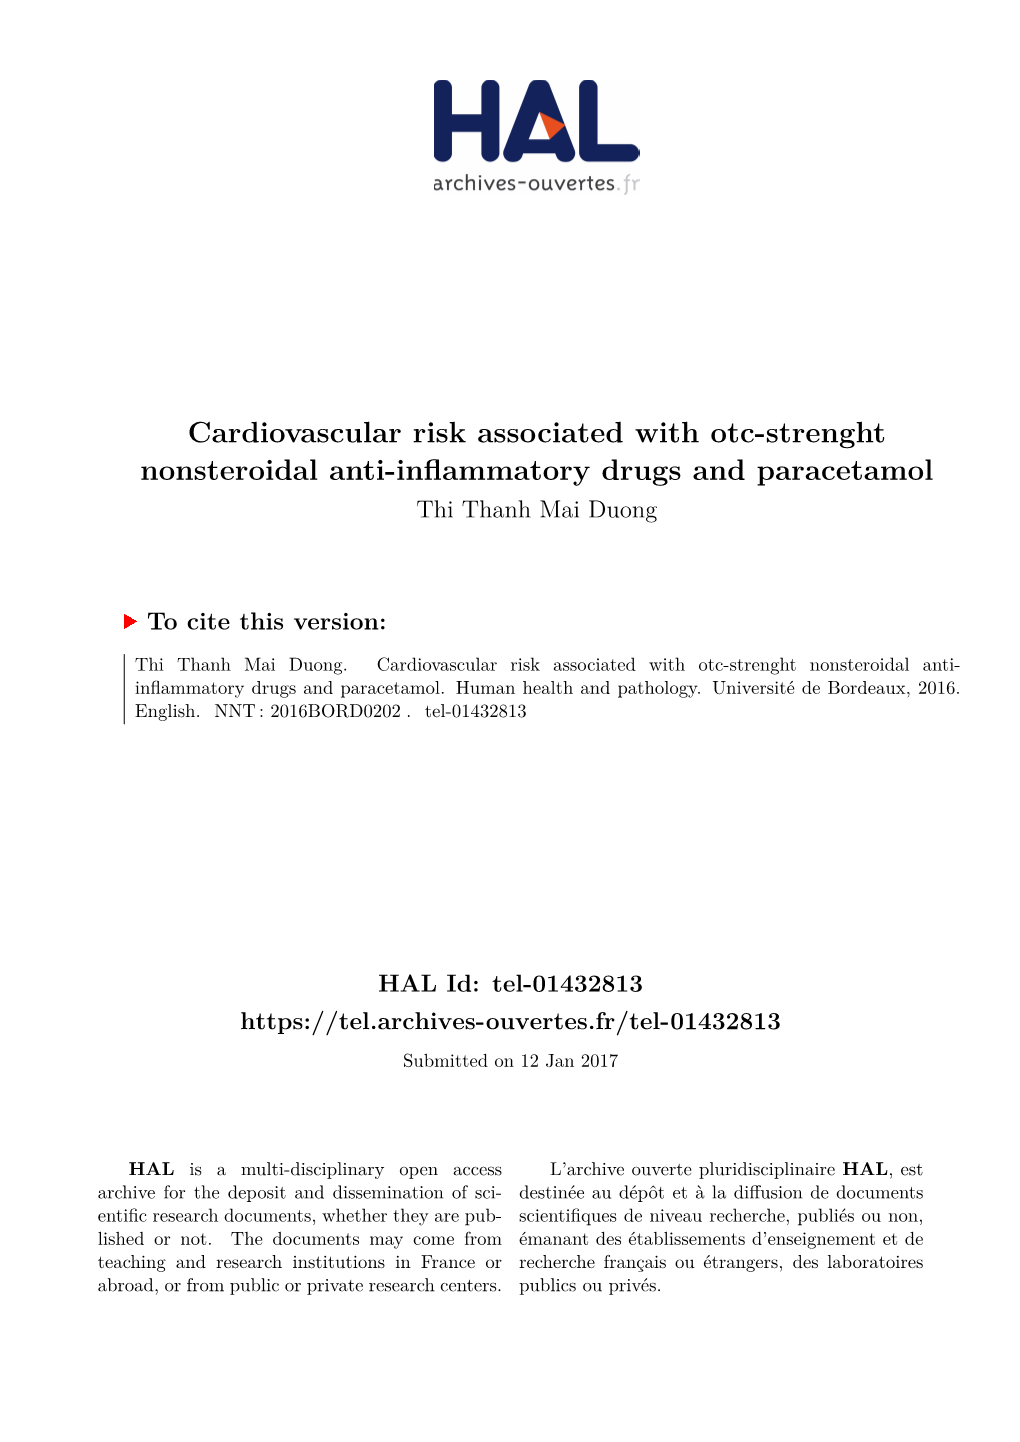 Cardiovascular Risk Associated with Otc-Strenght Nonsteroidal Anti-Inflammatory Drugs and Paracetamol Thi Thanh Mai Duong